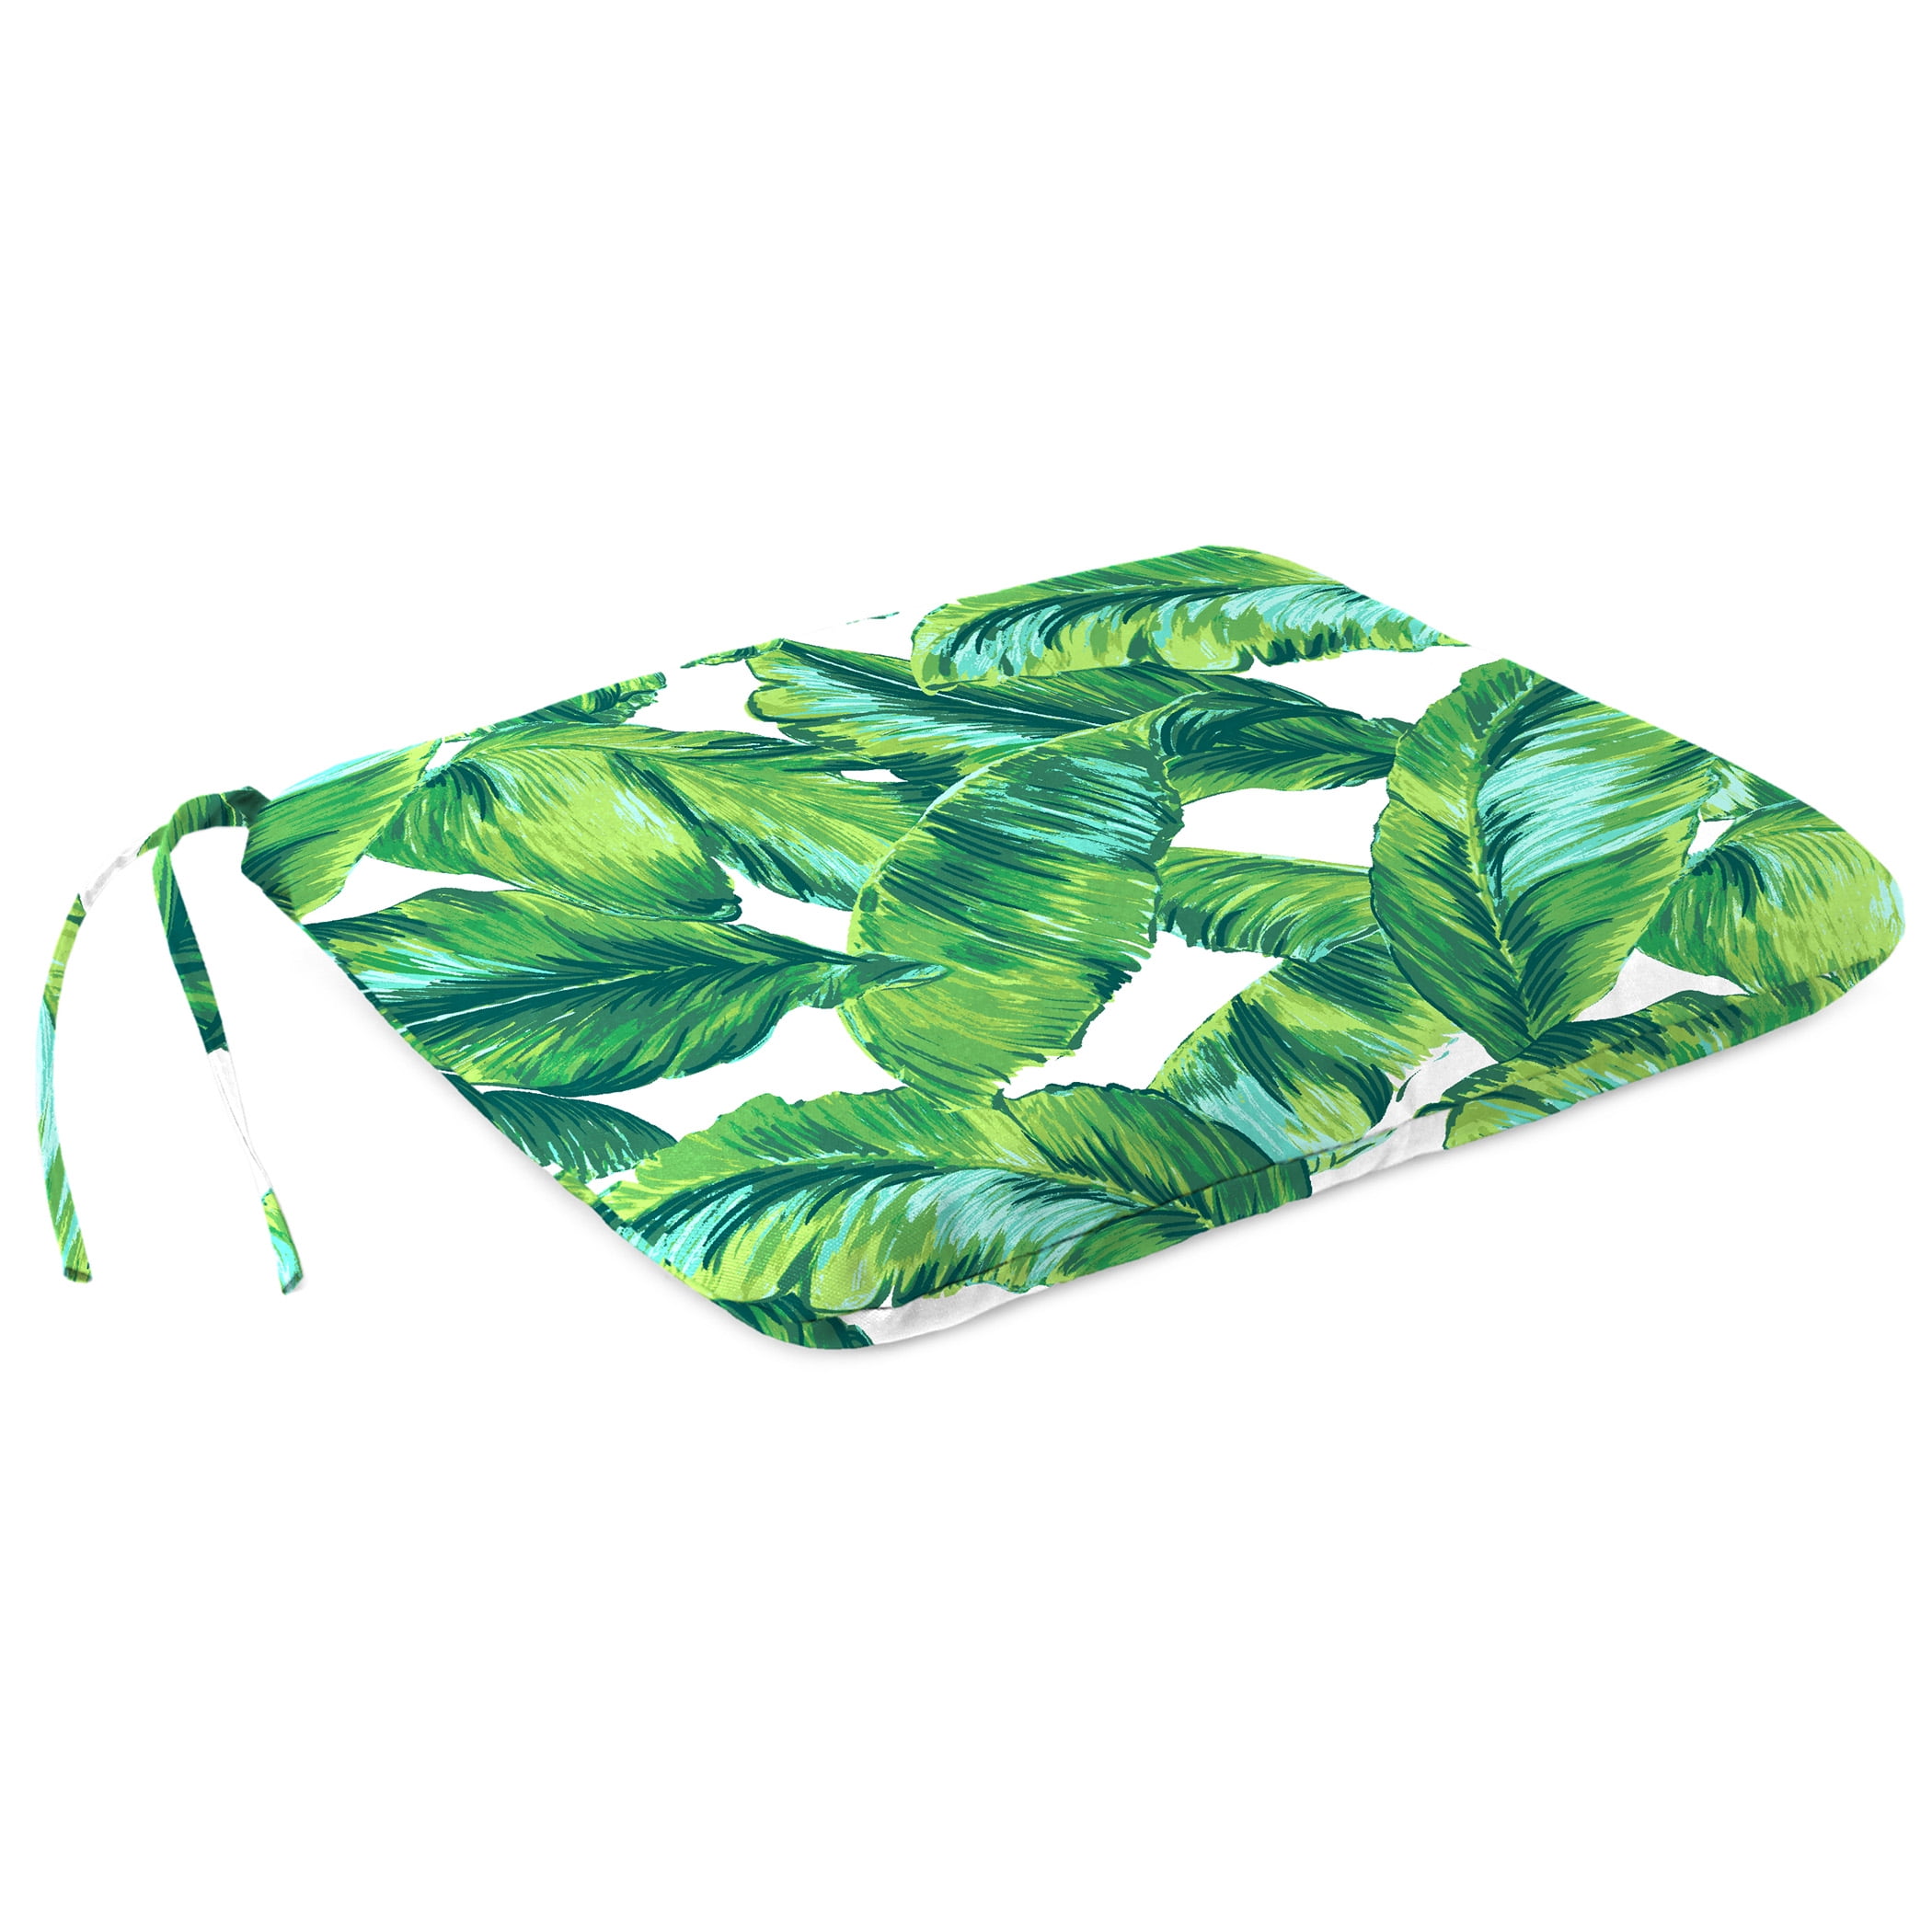 Mainstays Palm Leaves Outdoor Seat Pad Chair Cushion, Green, 17" x 15.5"